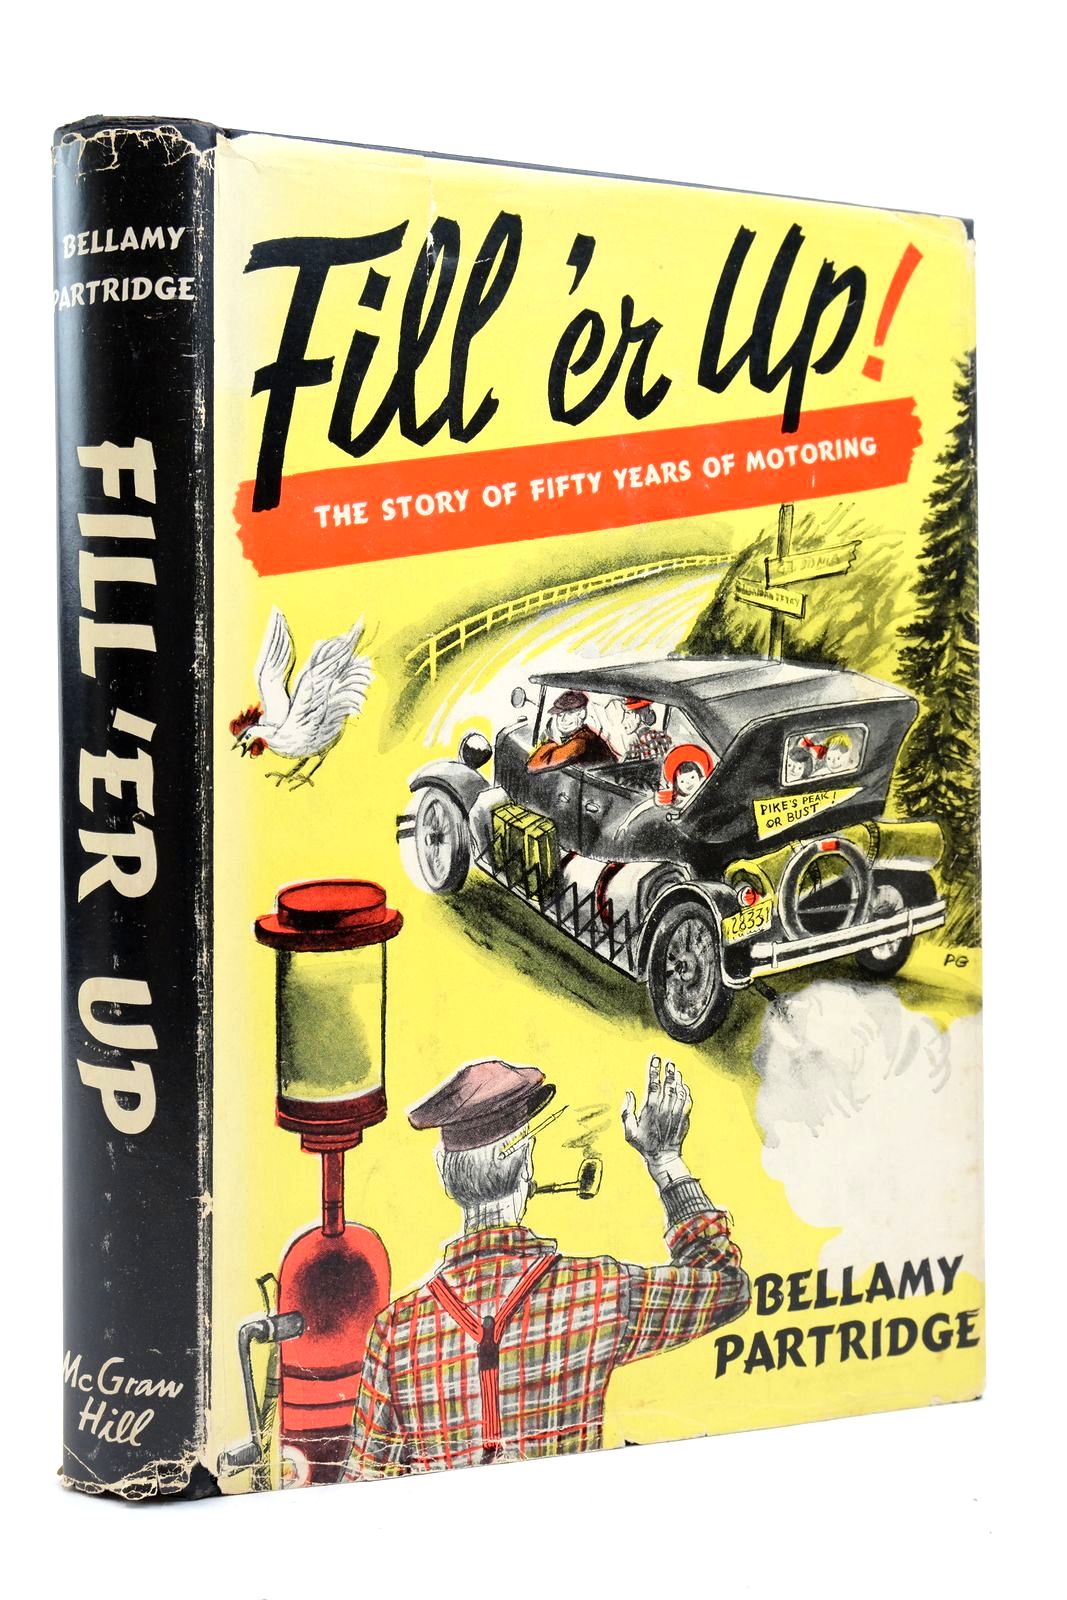 Photo of FILL 'ER UP!: THE STORY OF FIFTY YEARS OF MOTORING written by Partridge, Bellamy published by McGraw-Hill Book Company (STOCK CODE: 2139906)  for sale by Stella & Rose's Books